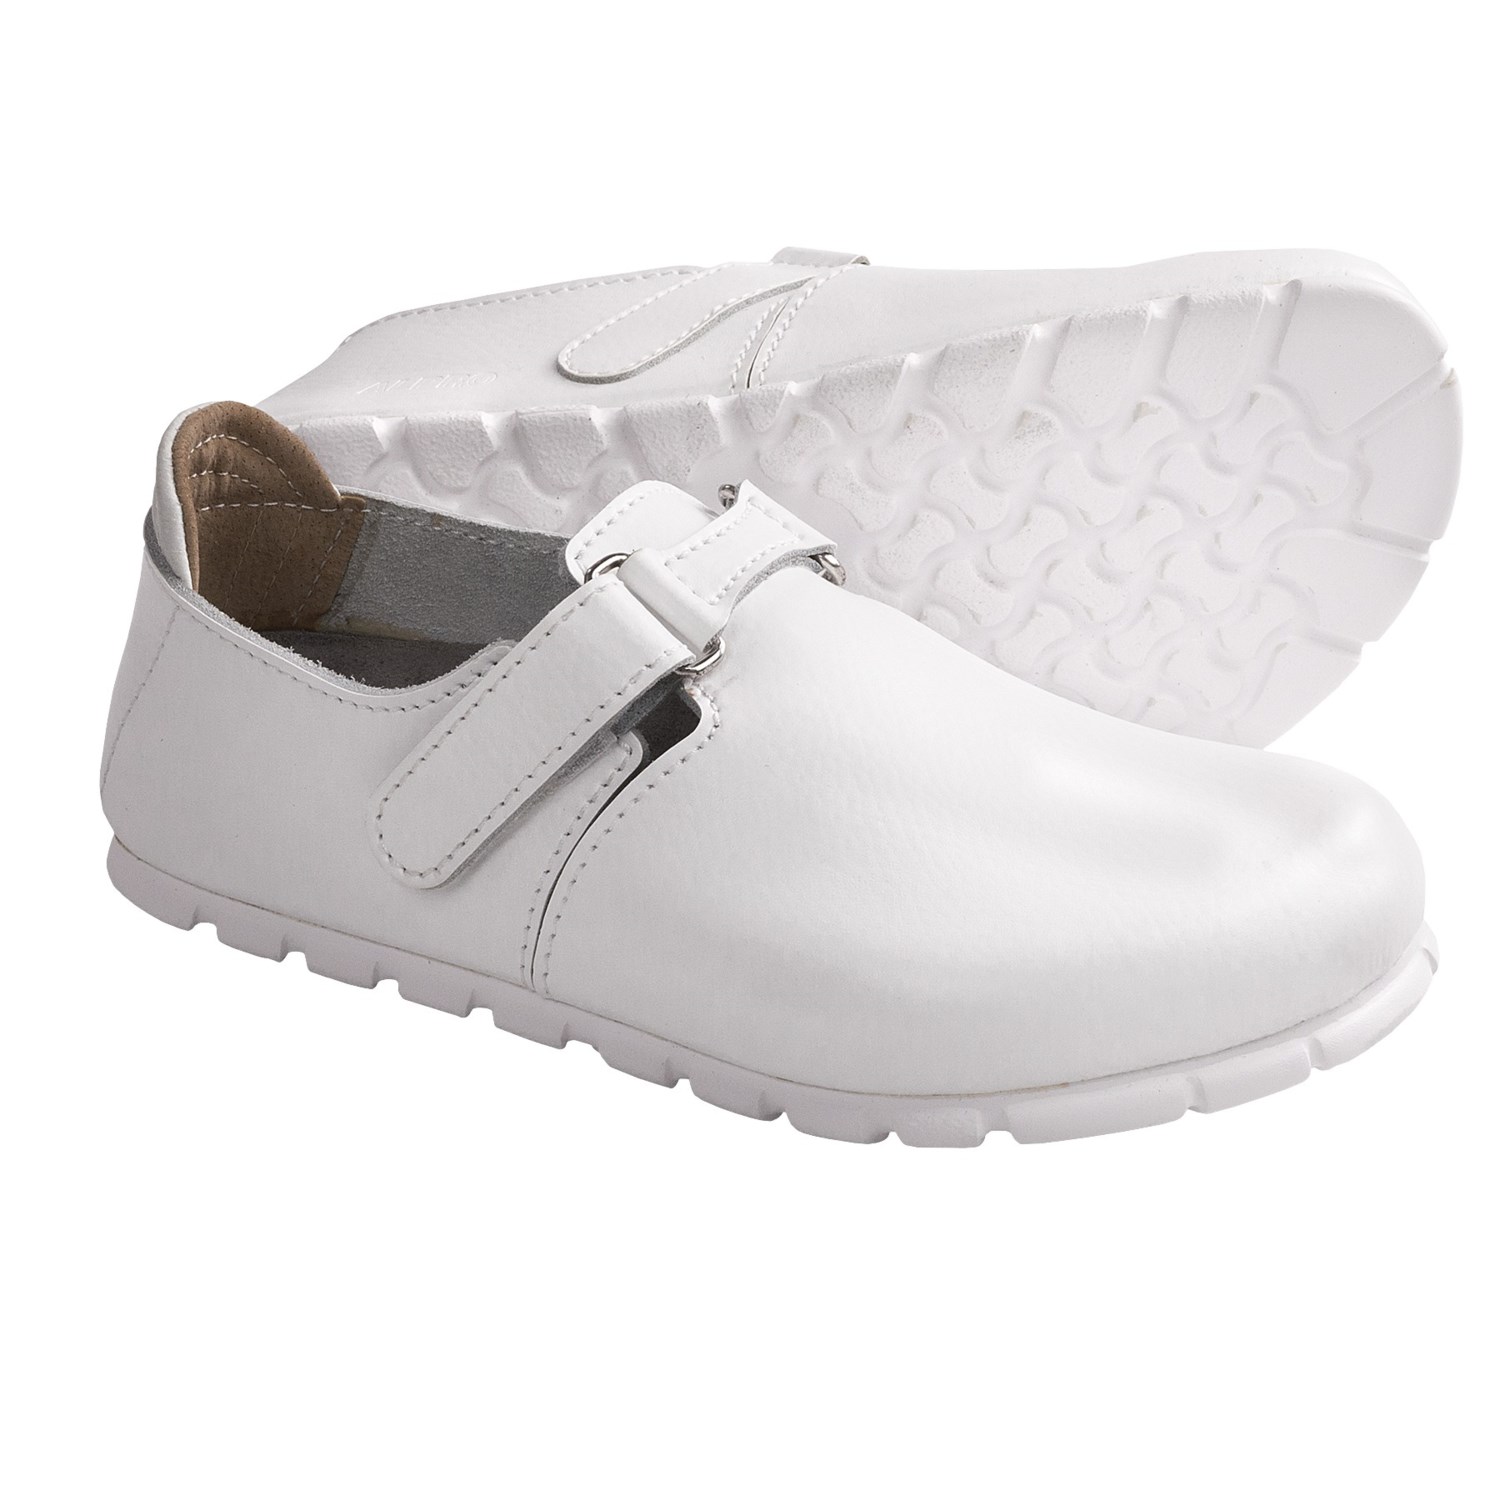 ... by Birkenstock G 500 Work Clogs - Leather (For Men and Women) in White